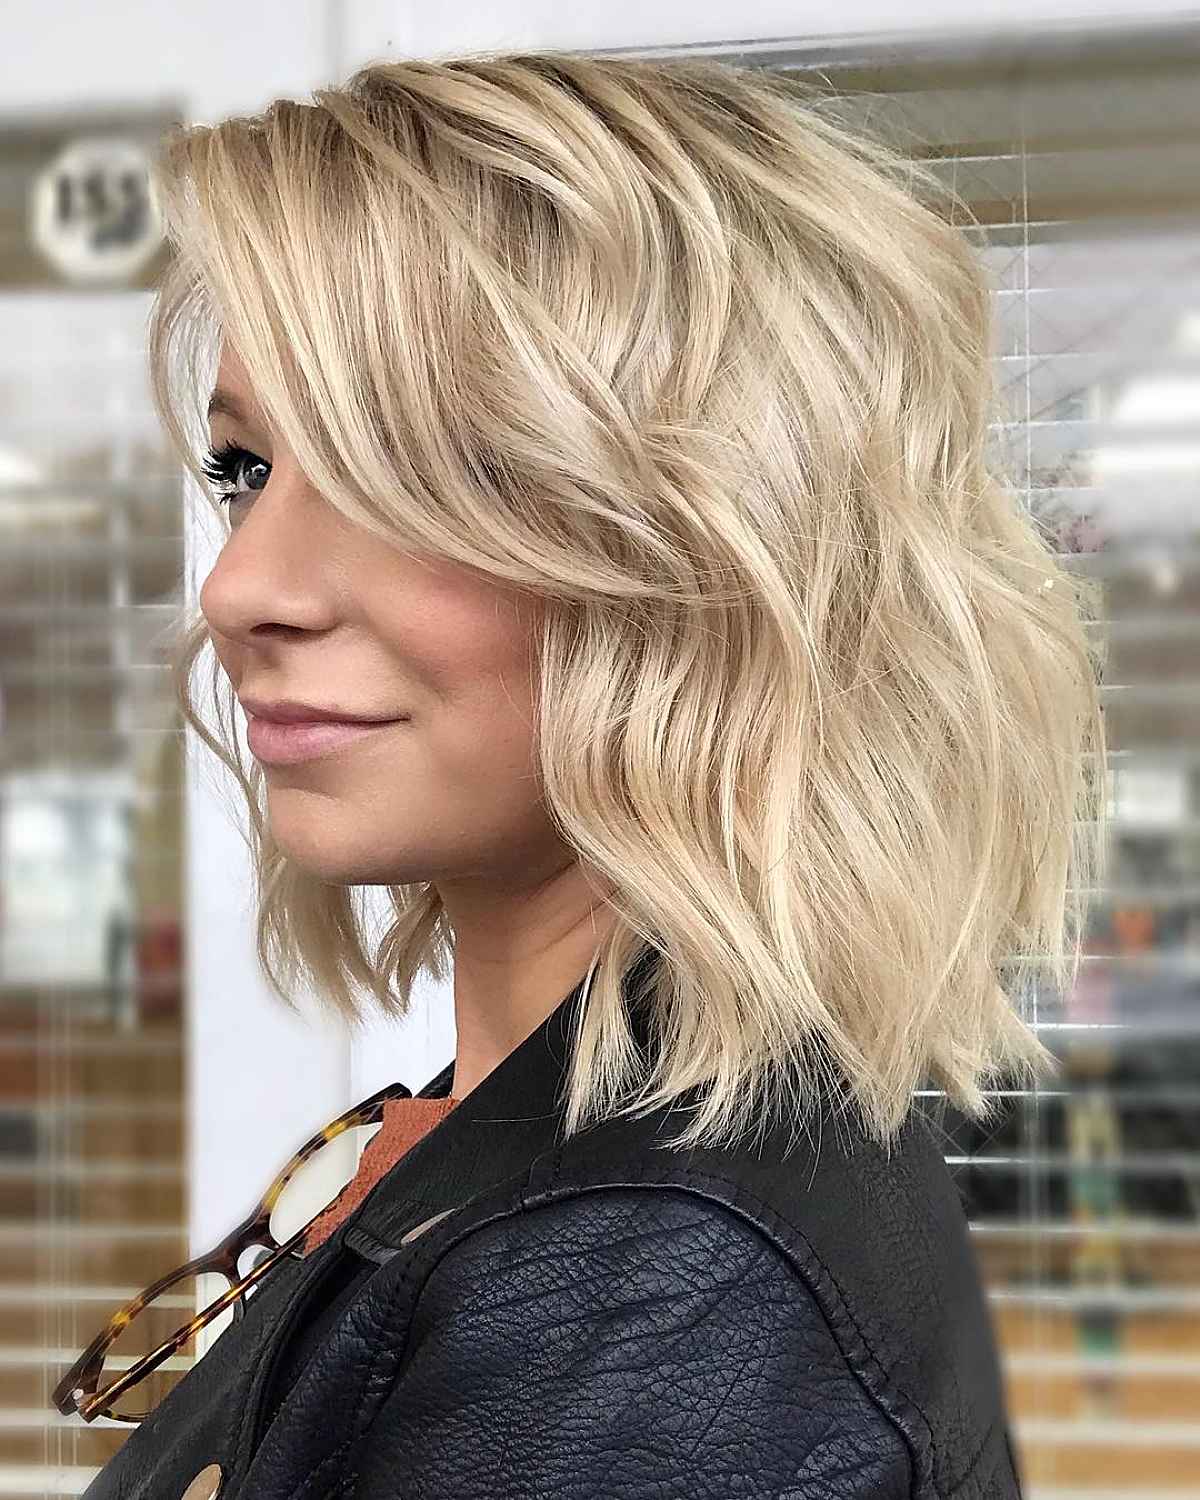 Long Bob with Fringe to the Side